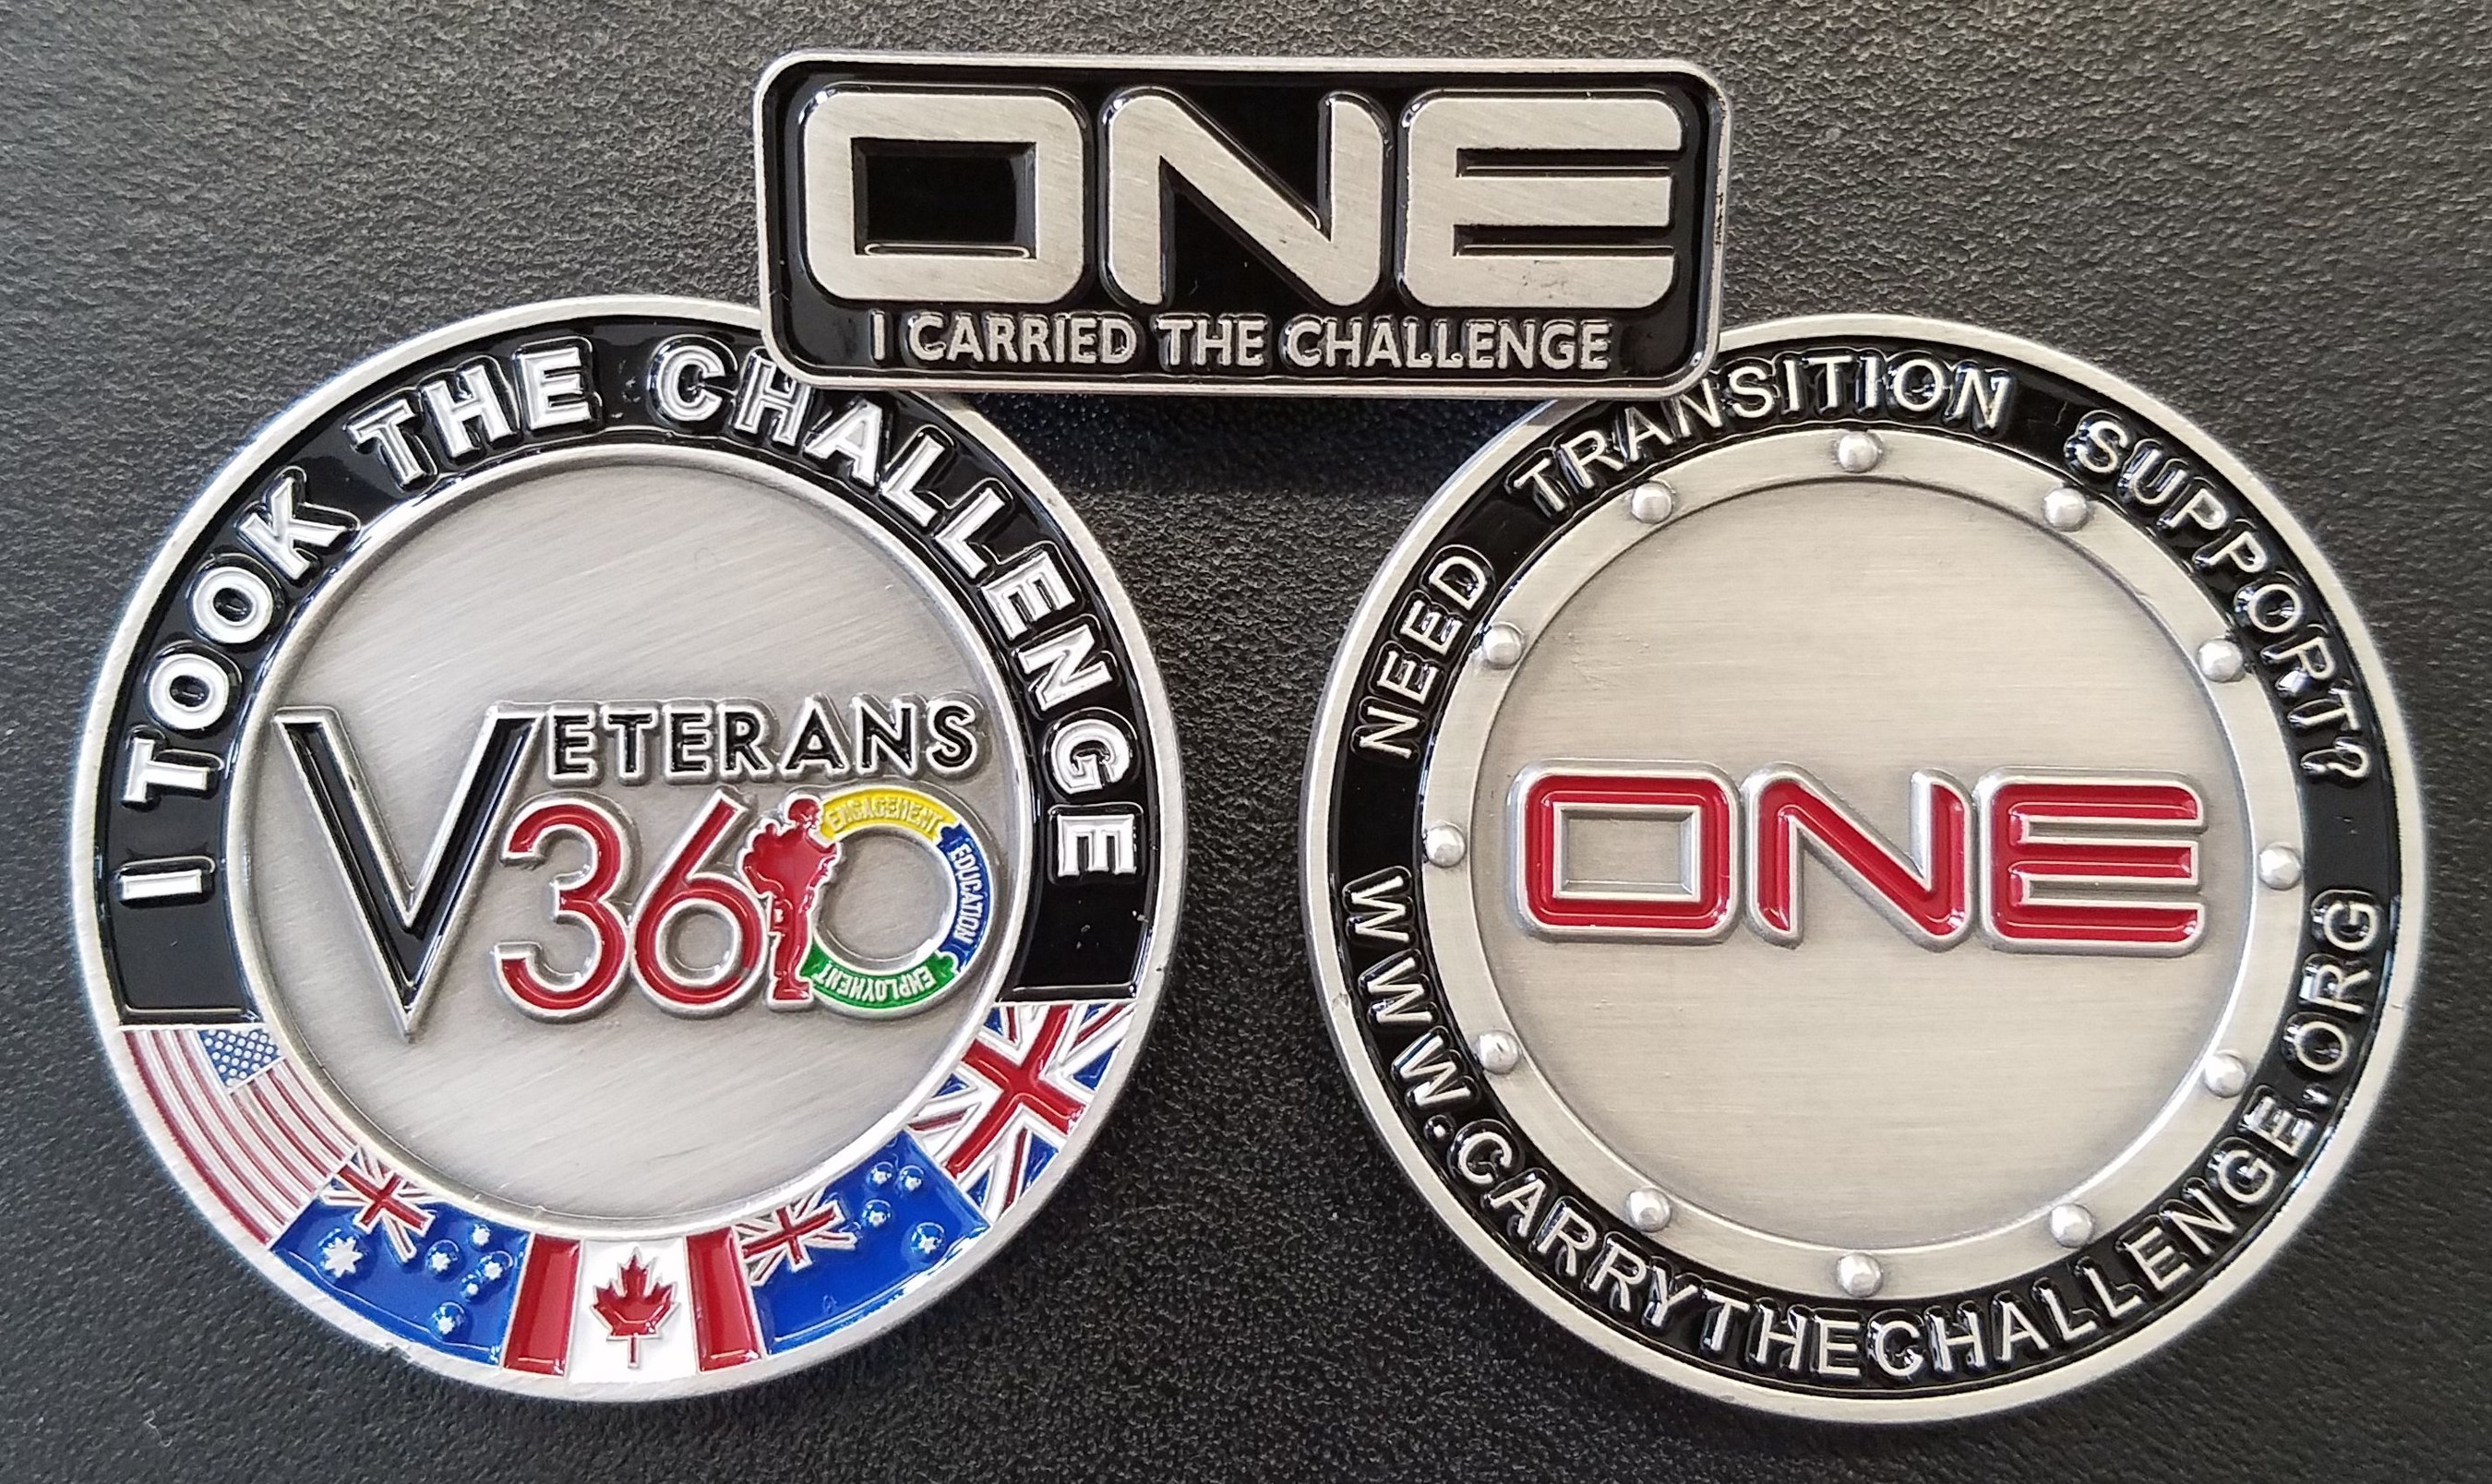 Accept the Challenge - share a coin with a young veteran and wear your pin with pride. ONE positive act for ONE veteran could be all it takes to save a life. We owe it to them.